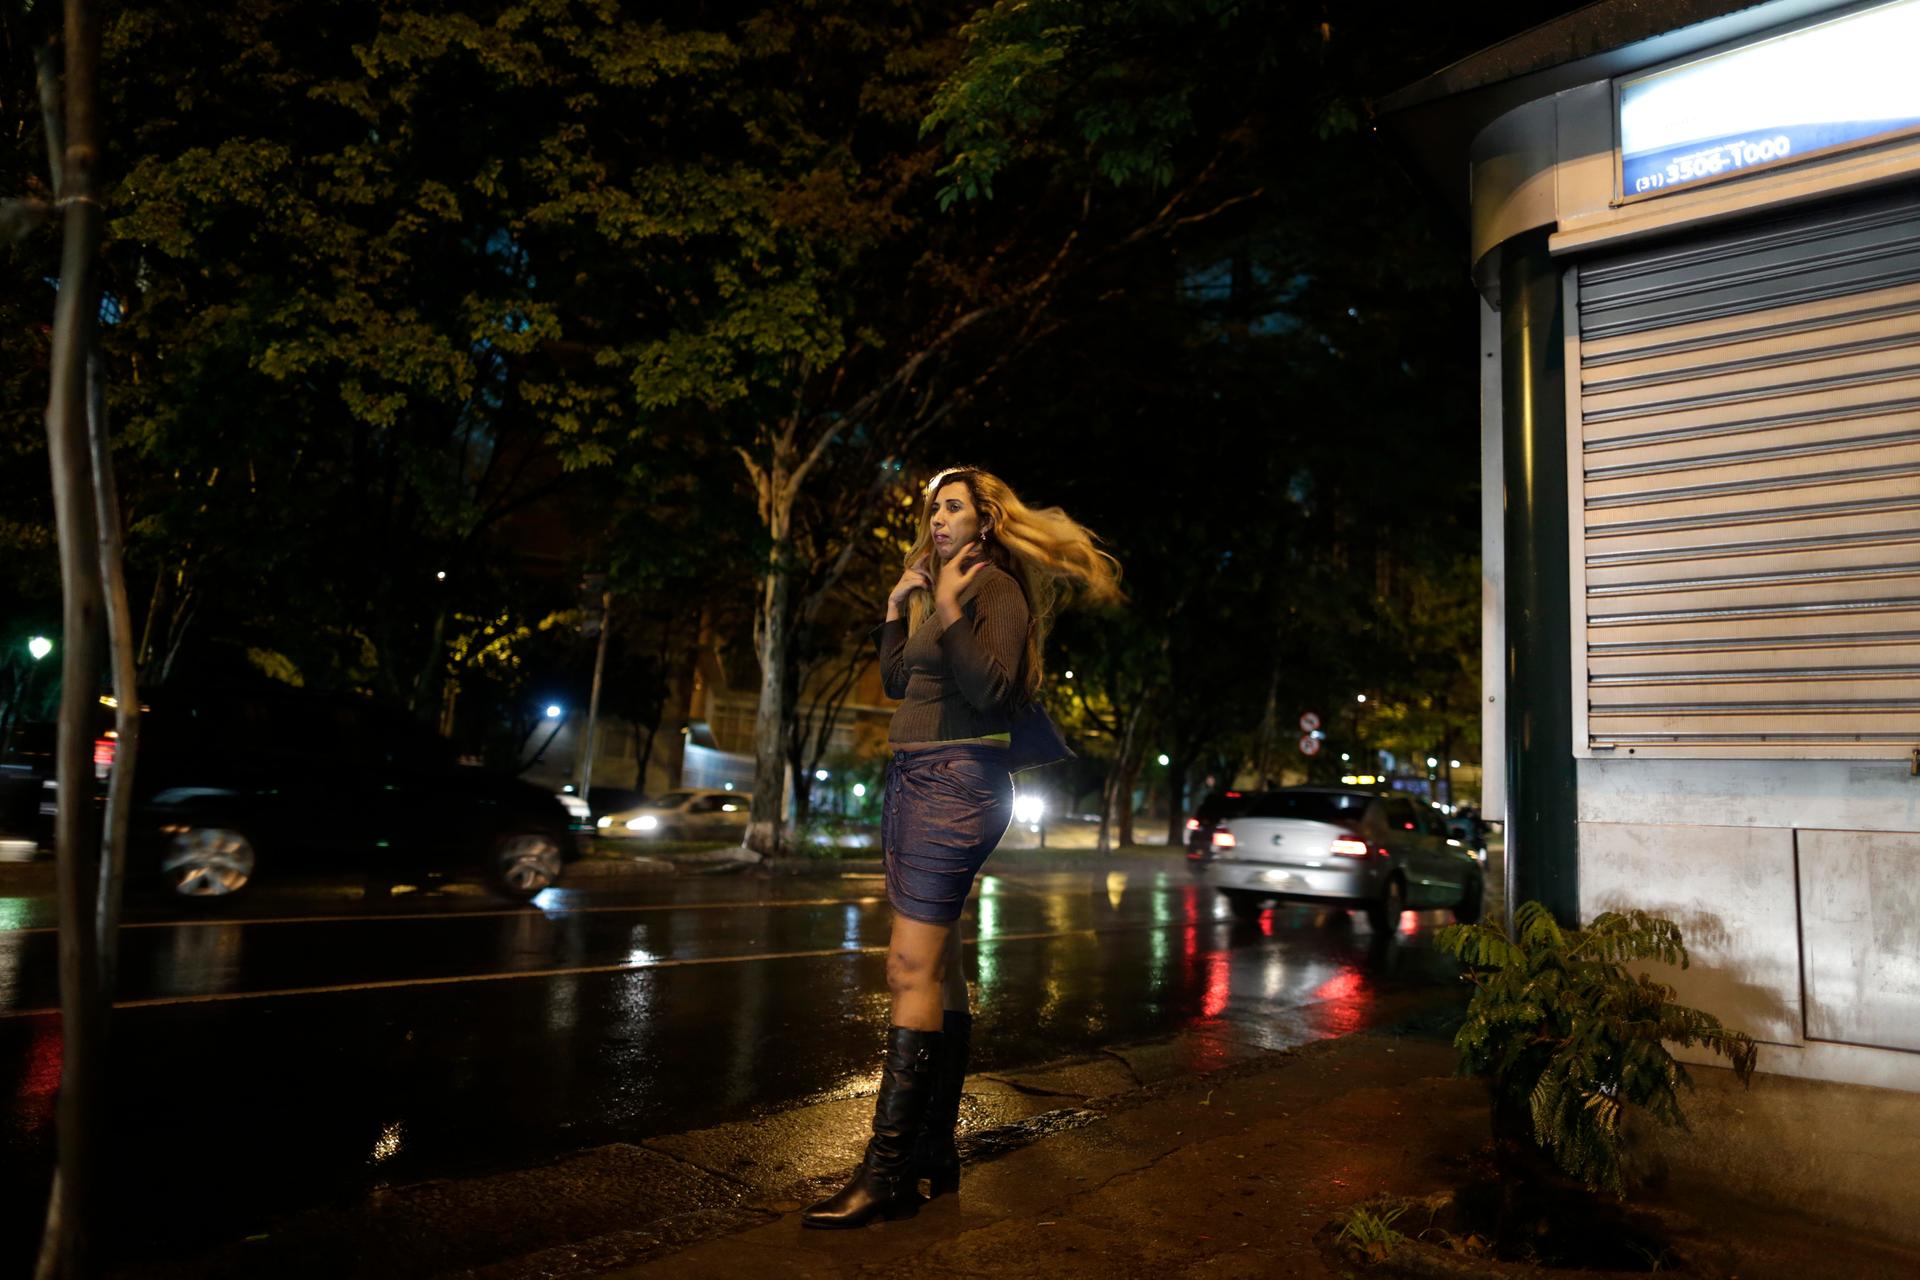 Cida Vieira, president of the Association of Prostitutes of Minas Gerais, looks for clients along a street in Belo Horizonte, November 5, 2013. A group of sex workers are taking English classes once a week in preparation for the World Cup. 